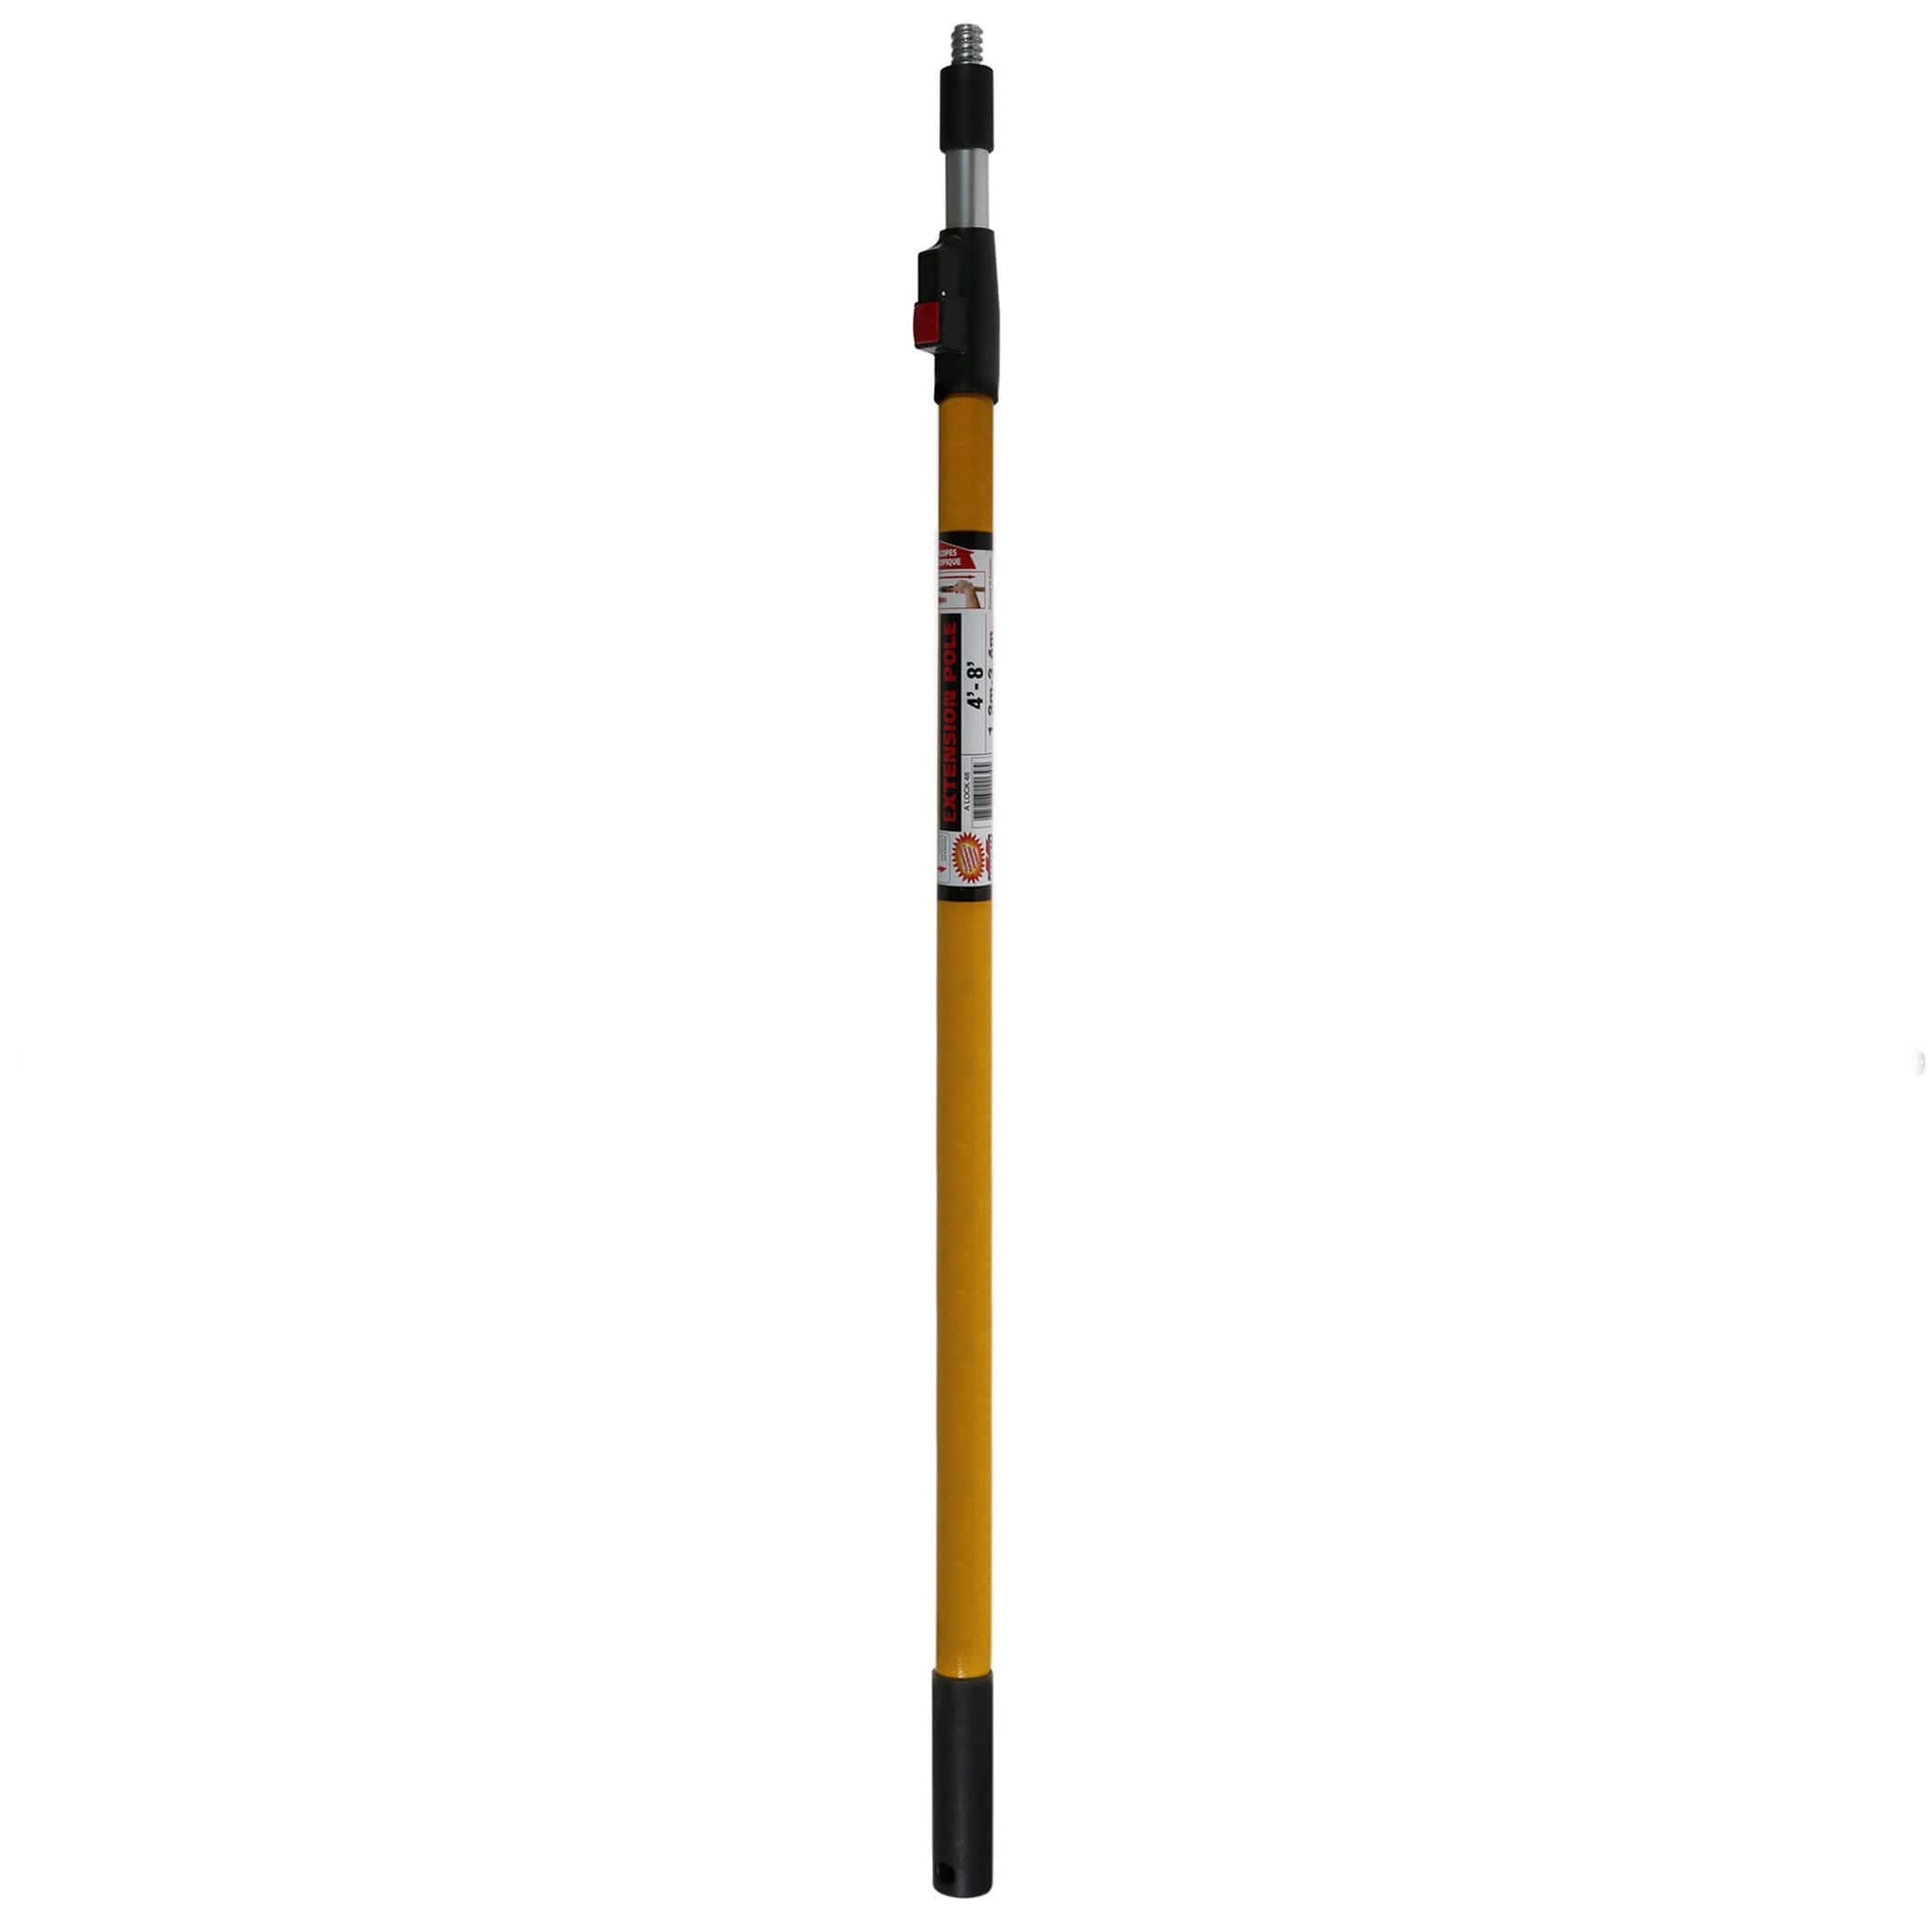 8 to 16 Feet (ft) Telescoping Pole with E-Z Lock Device